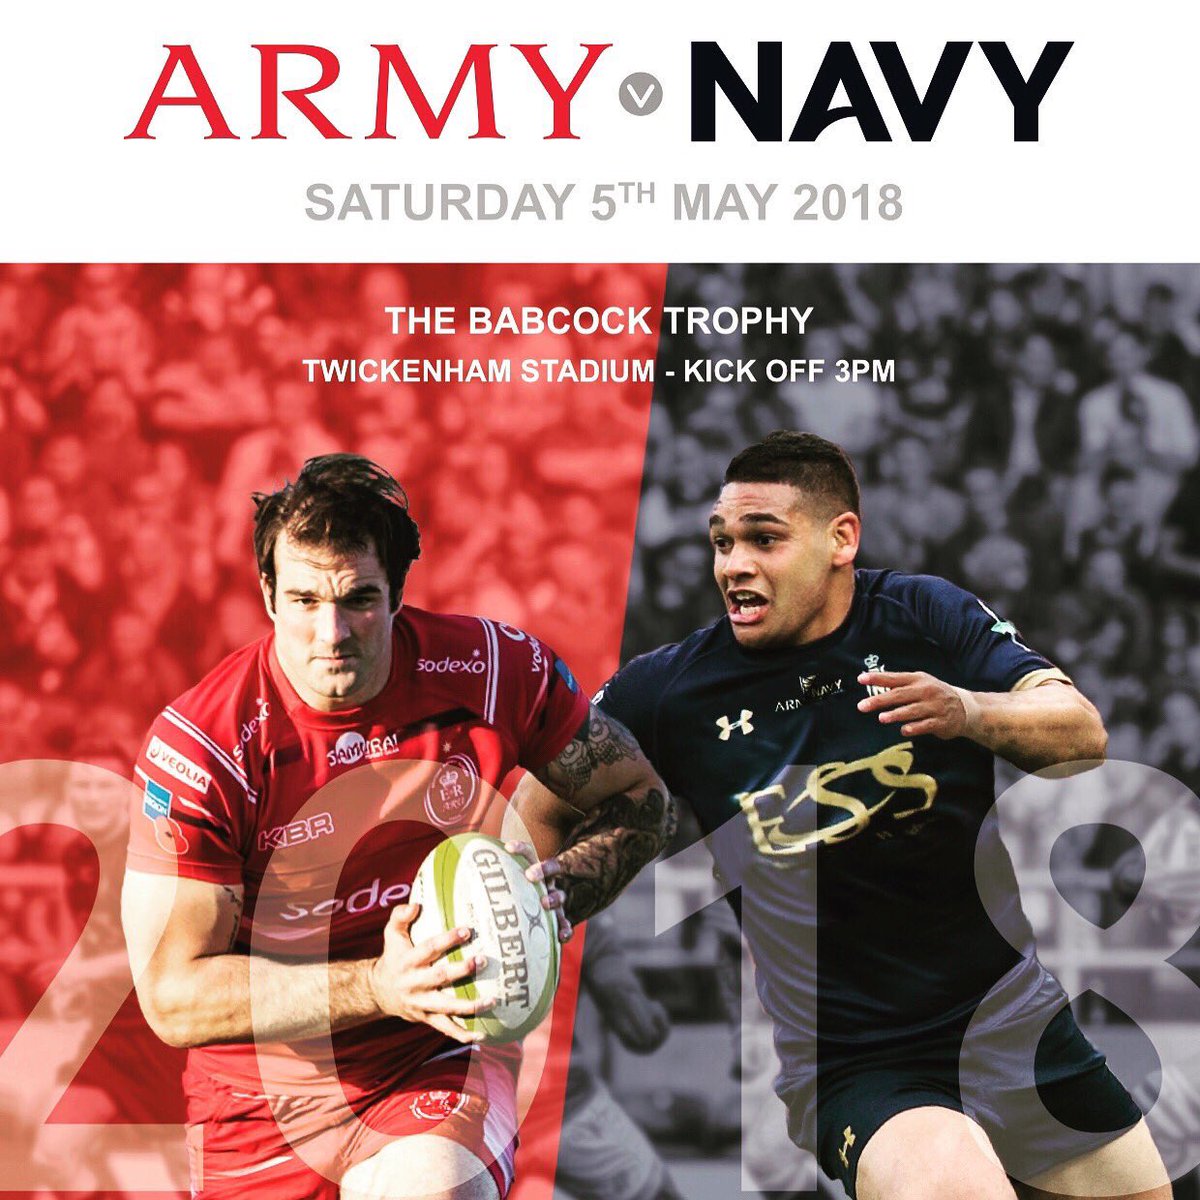 Can’t wait for the weekend, watch a bit of rugby and catch up with some lifelong mates #ArmyVNavy @armyrugbyunion